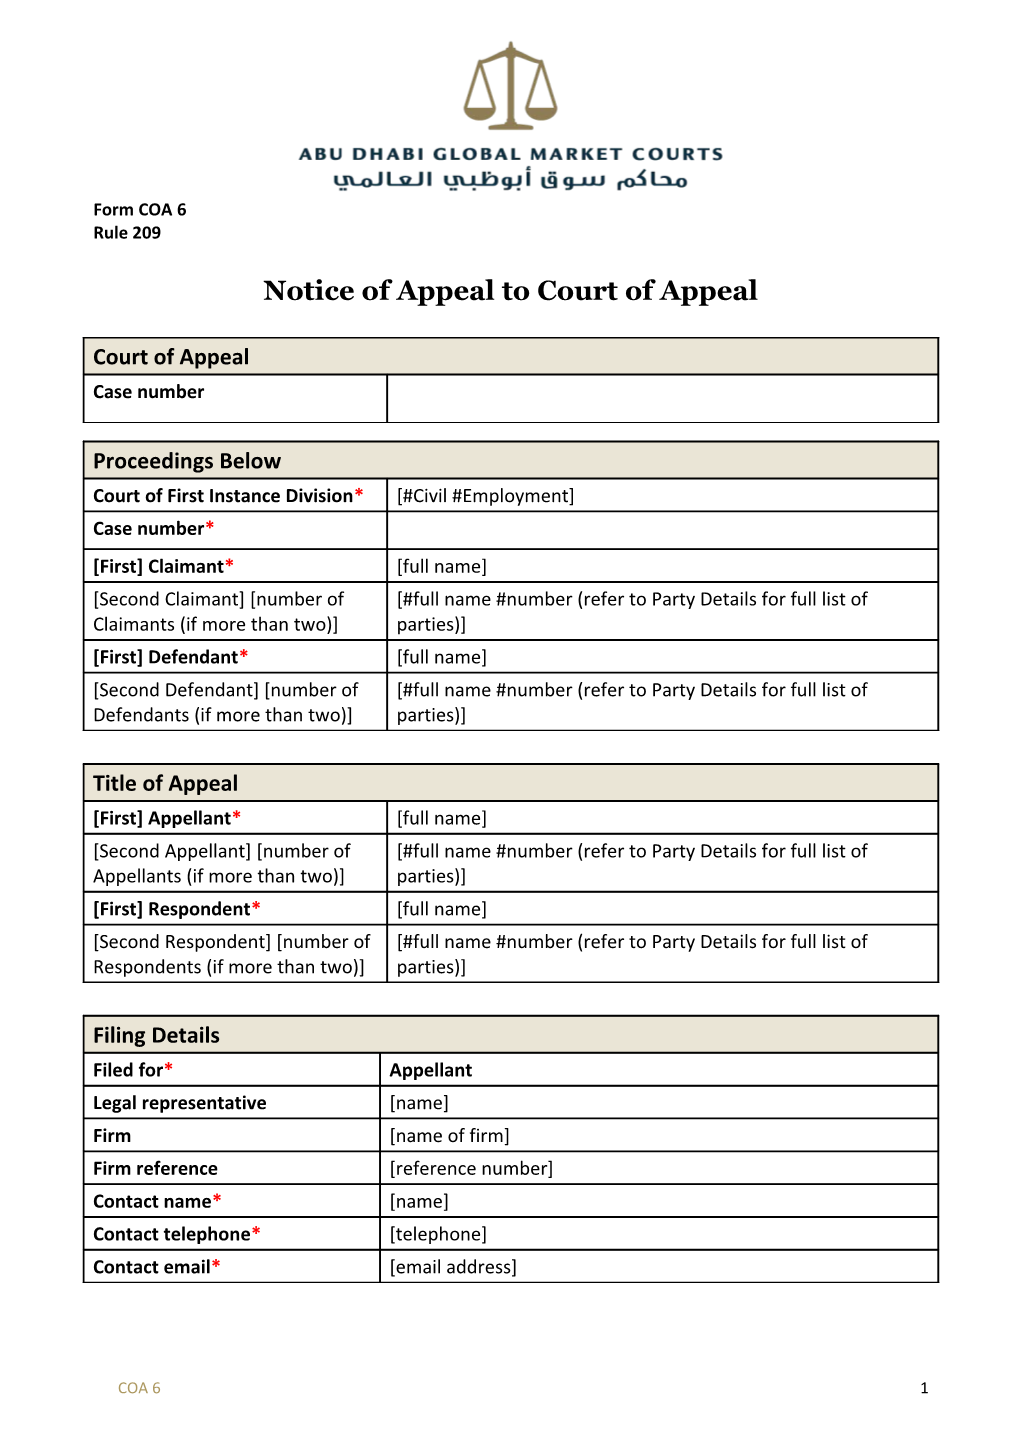 Notice of Appeal to Court of Appeal